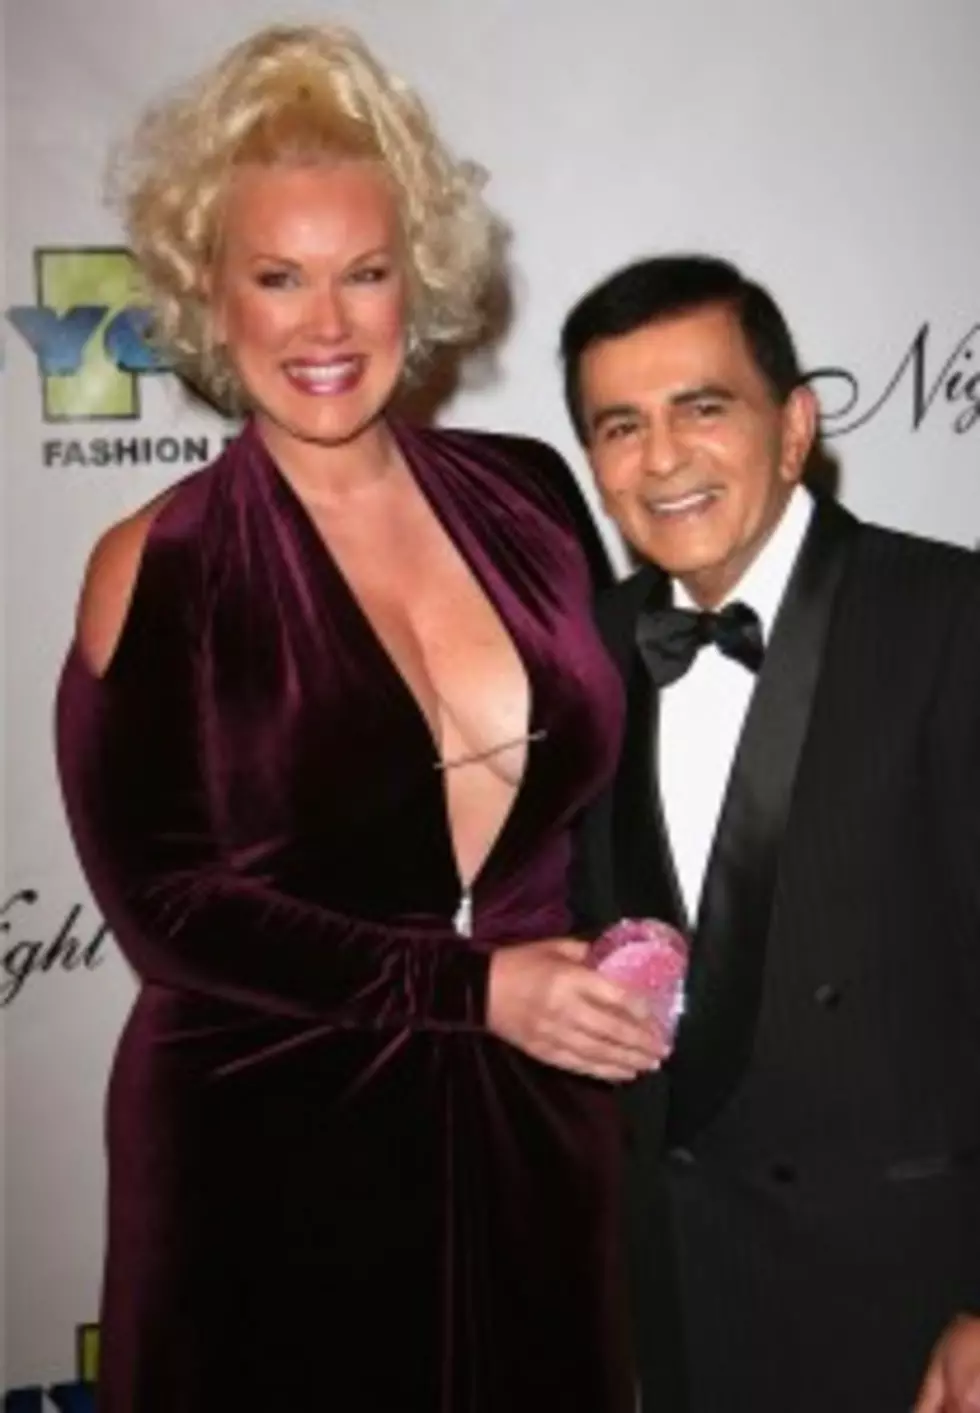 Casey Kasem Missing; Investigators Looking Into Whereabouts